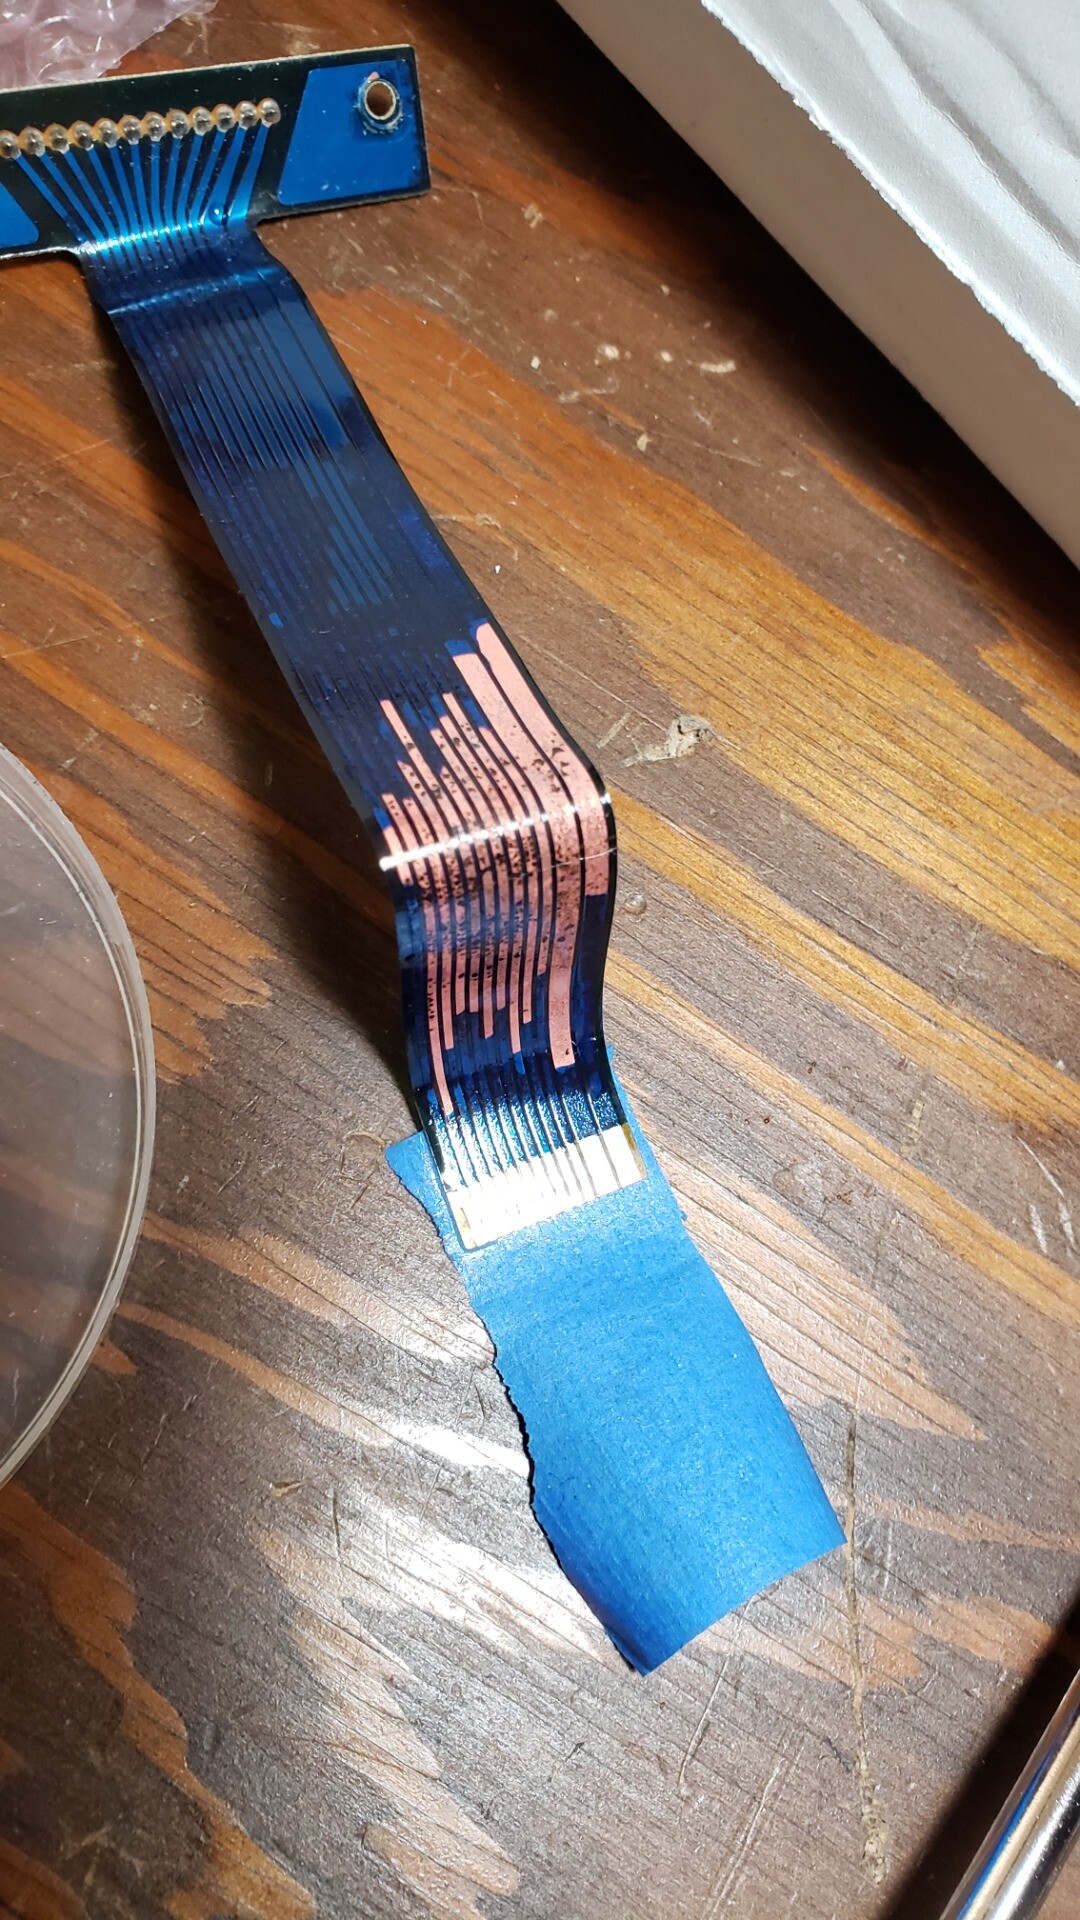 A flexible ribbon cable with visibly damaged copper conductors due to a leaking laptop battery.